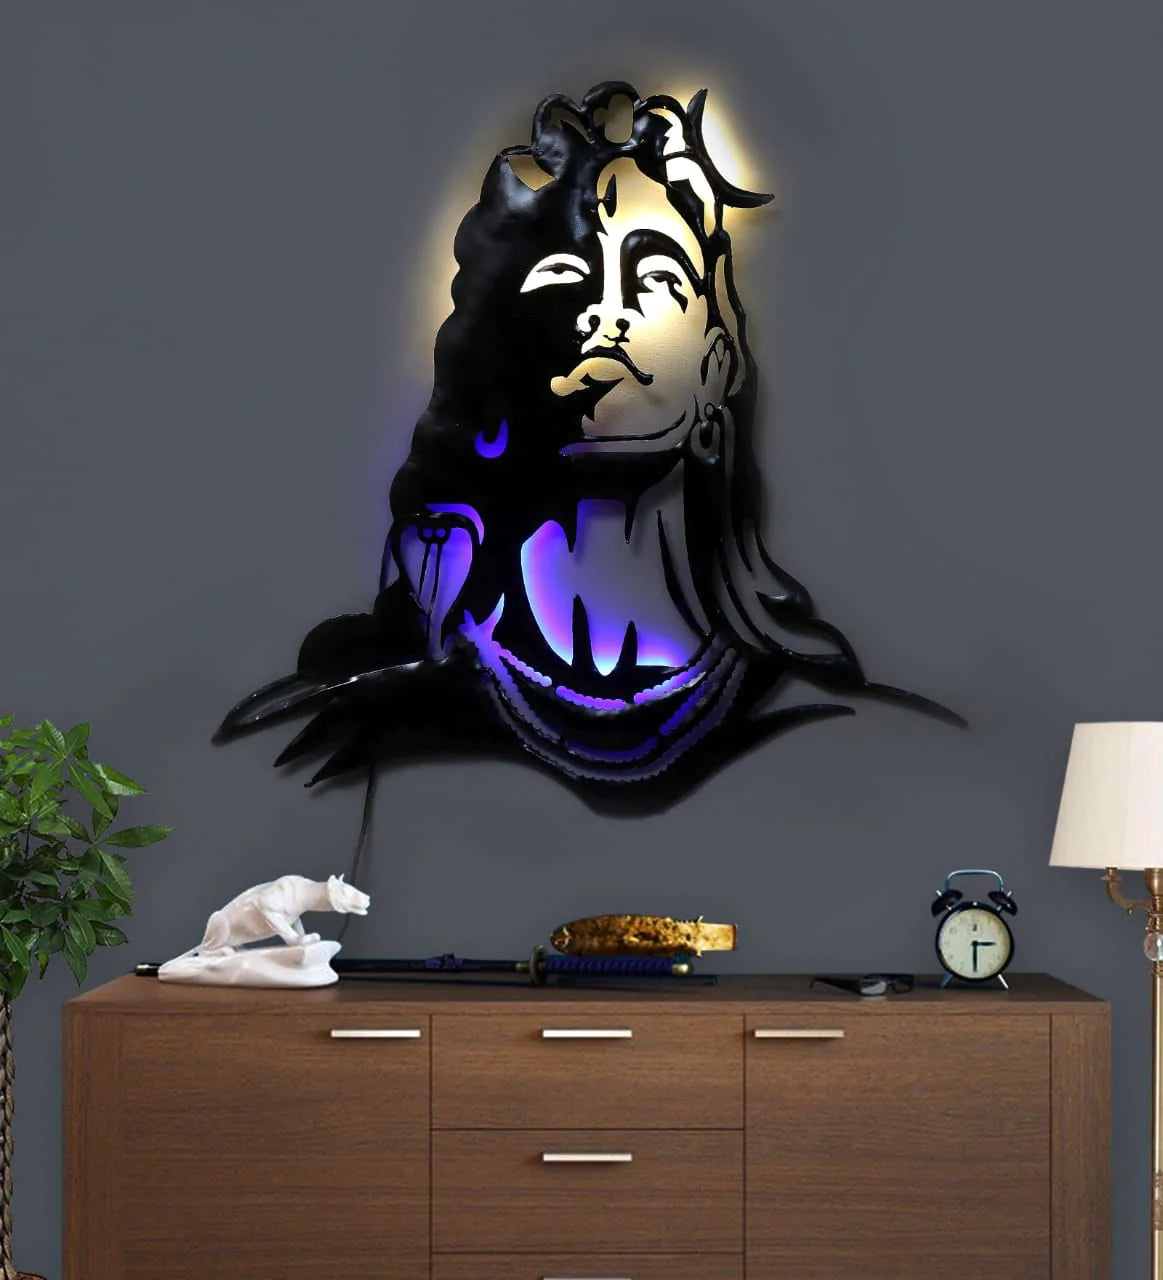 Big Size ( 2.5 feet) Metal frame Lord Shiva wall hanging statue with LED lights, Perfect for Home decor, Wall decor